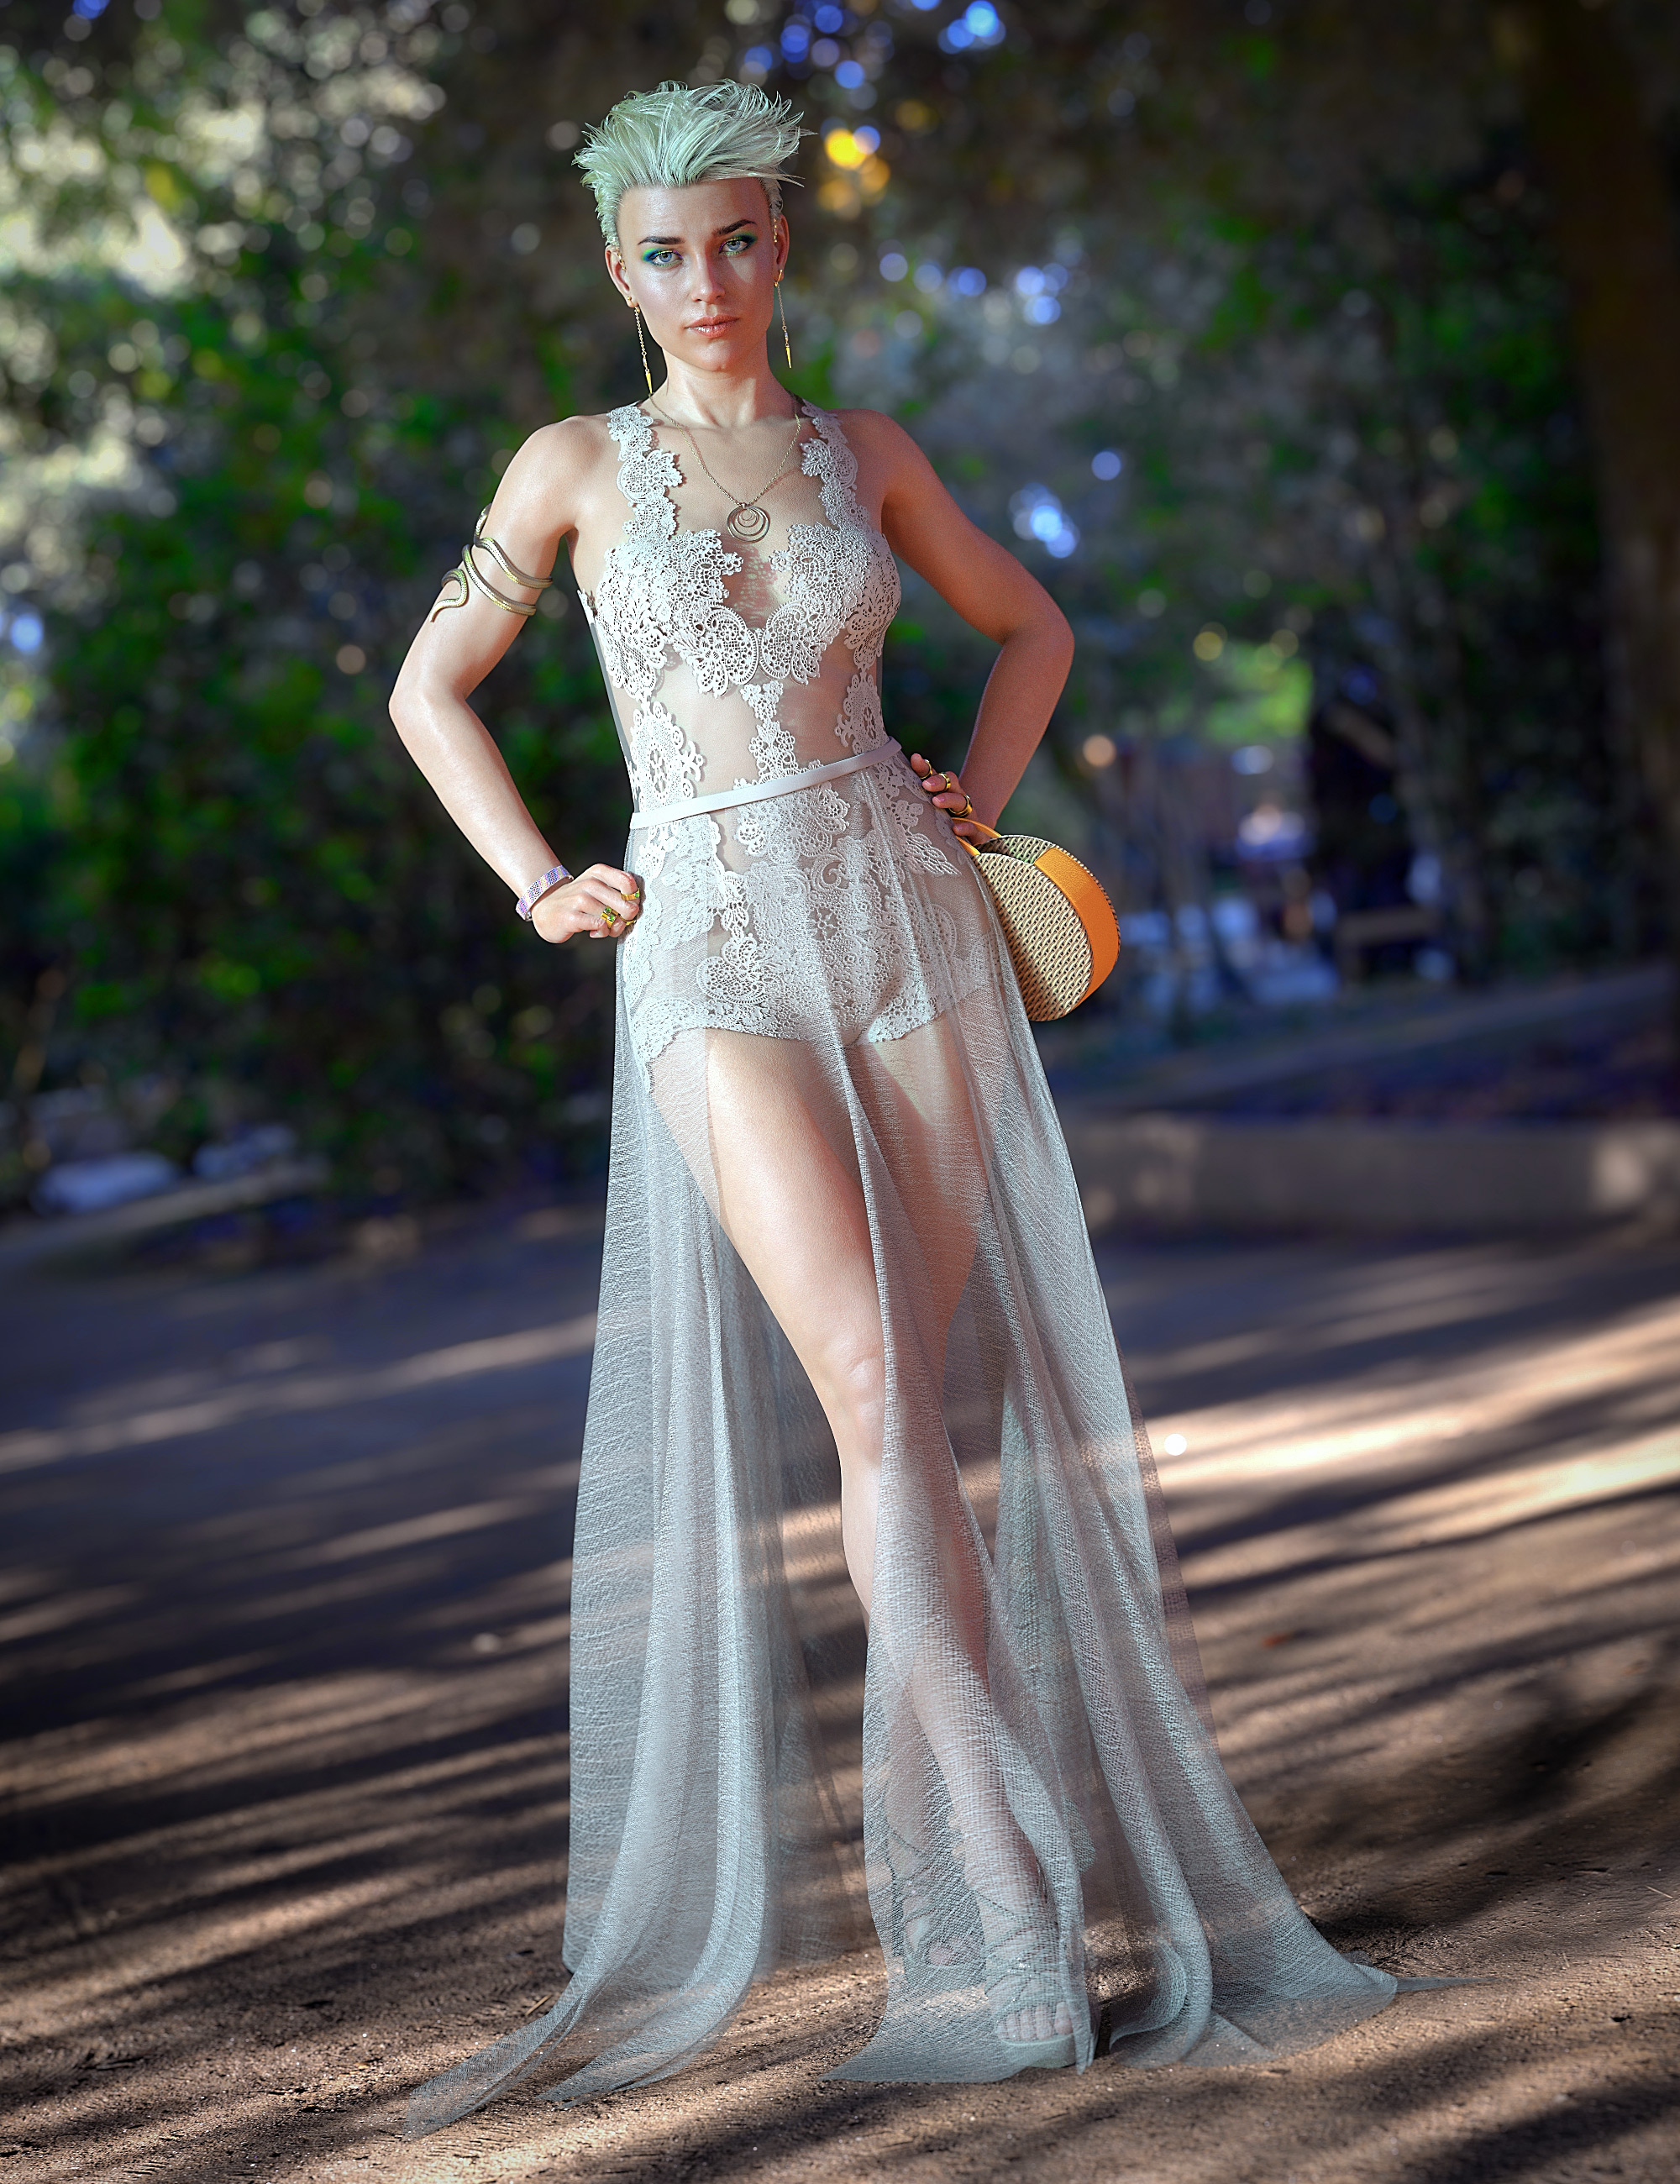 UltraHD IRAY HDRI With DOF - Parks and Creation II by: Cake OneBob Callawah, 3D Models by Daz 3D